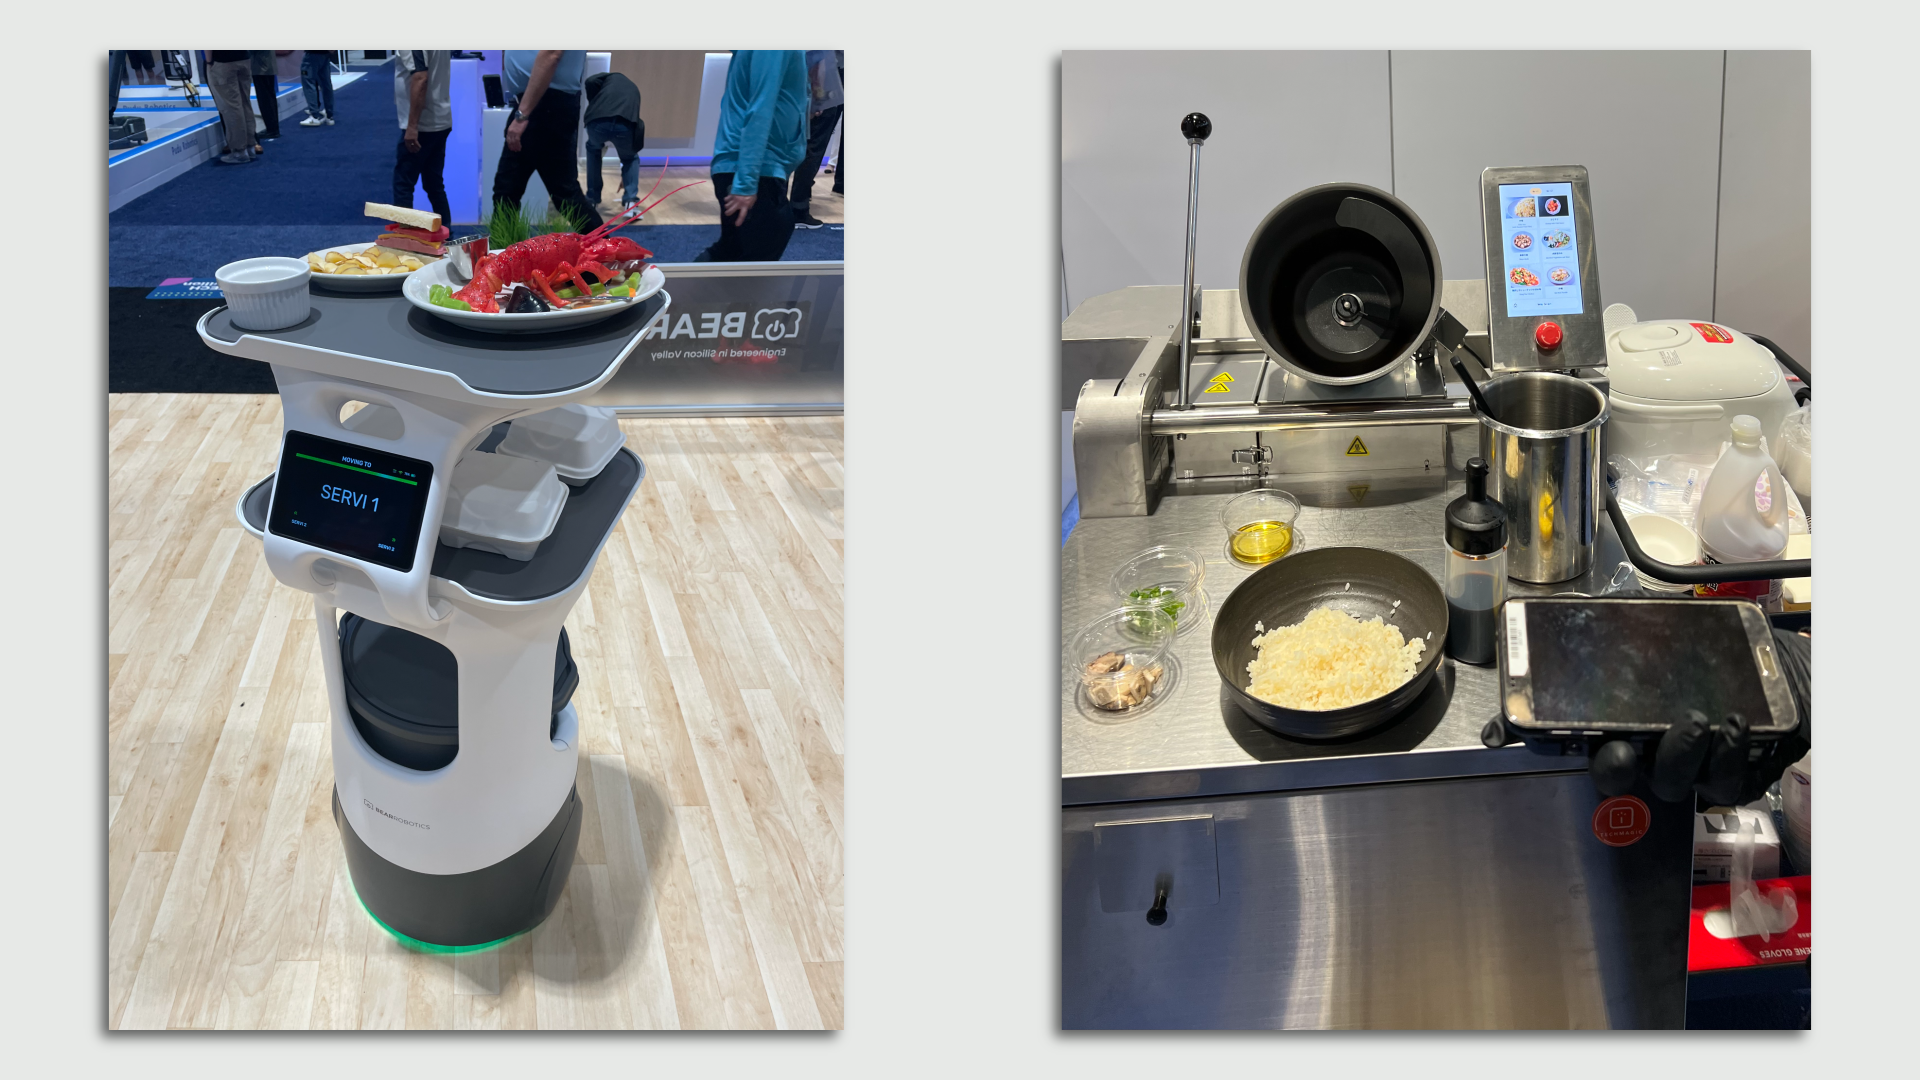 At left, a robot serving meals on a tray; at right, a stir-frying robot.